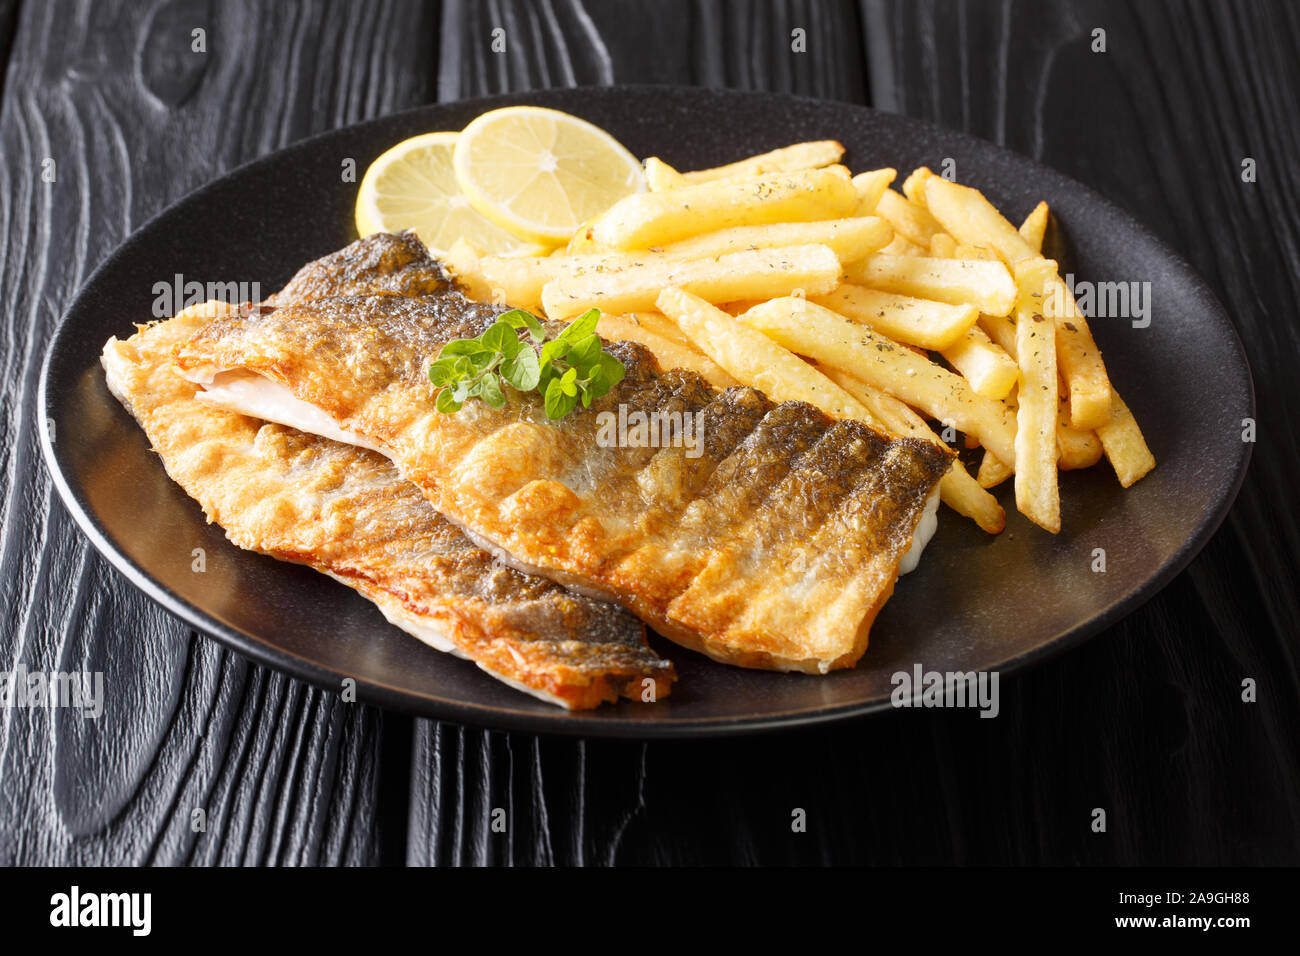 Tasty grilled sea bass fillet with french fries and lemon close-up on a plate on the table. horizontal Stock Photo